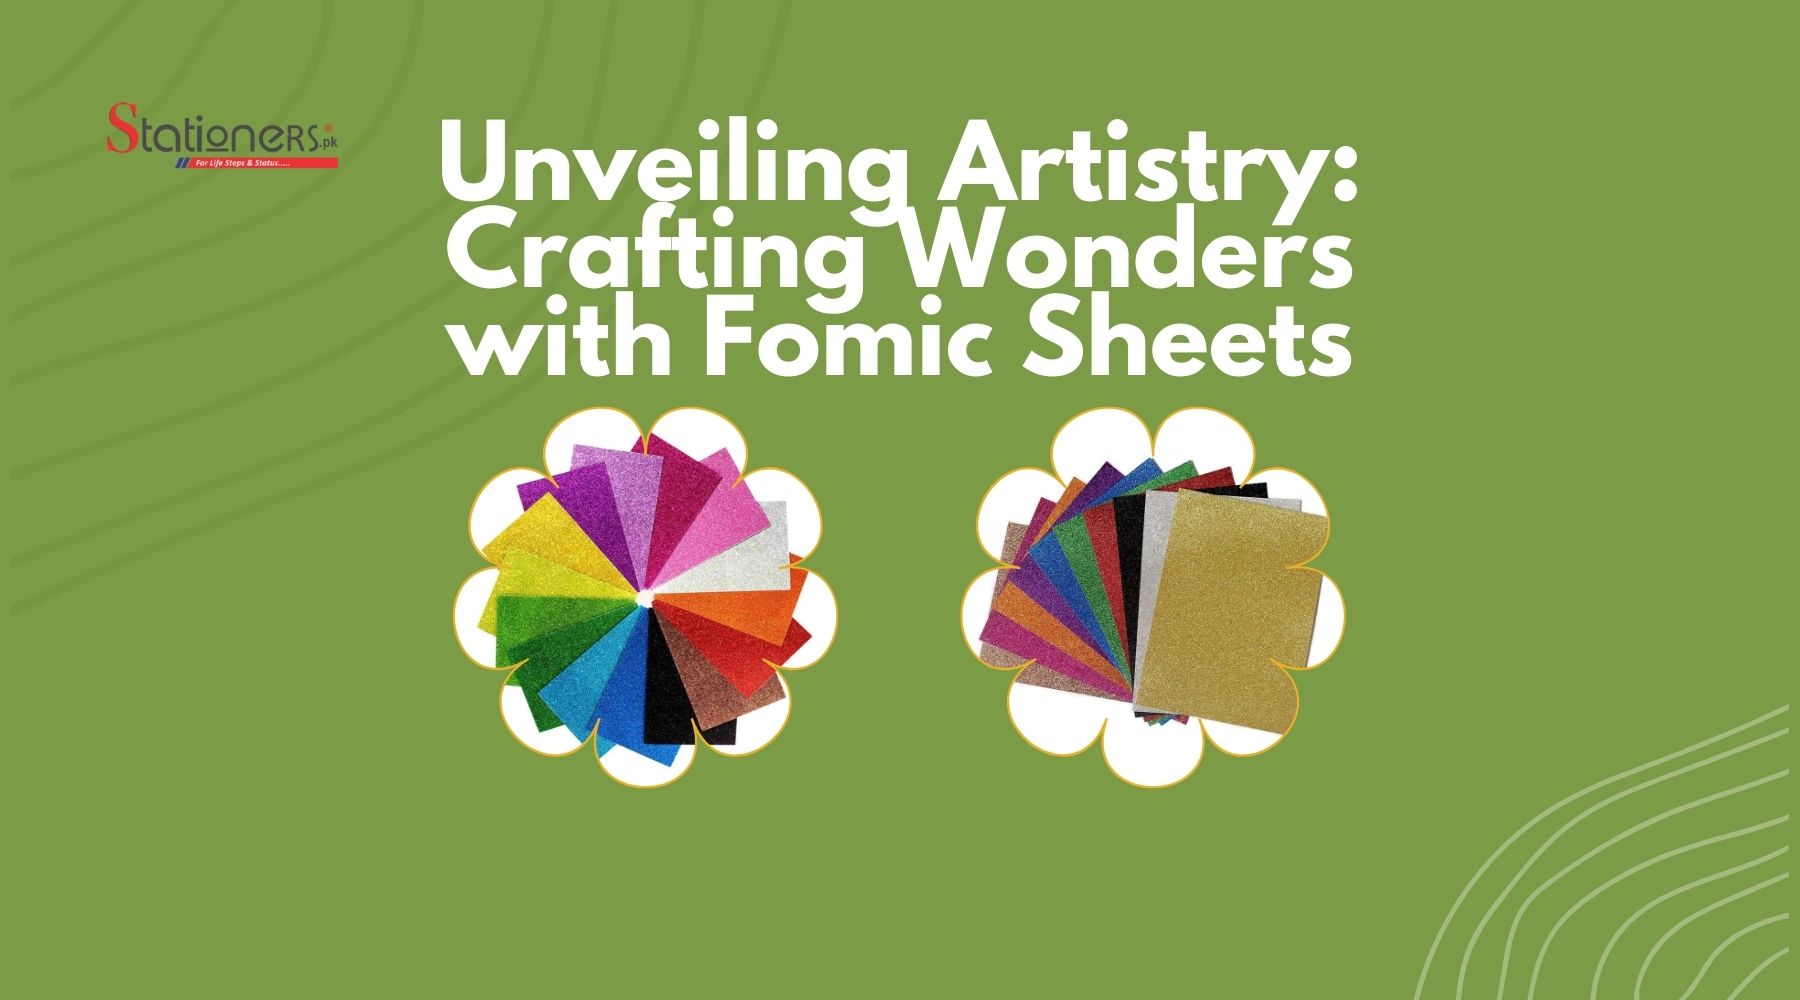 Crafting Wonders with Fomic Sheets